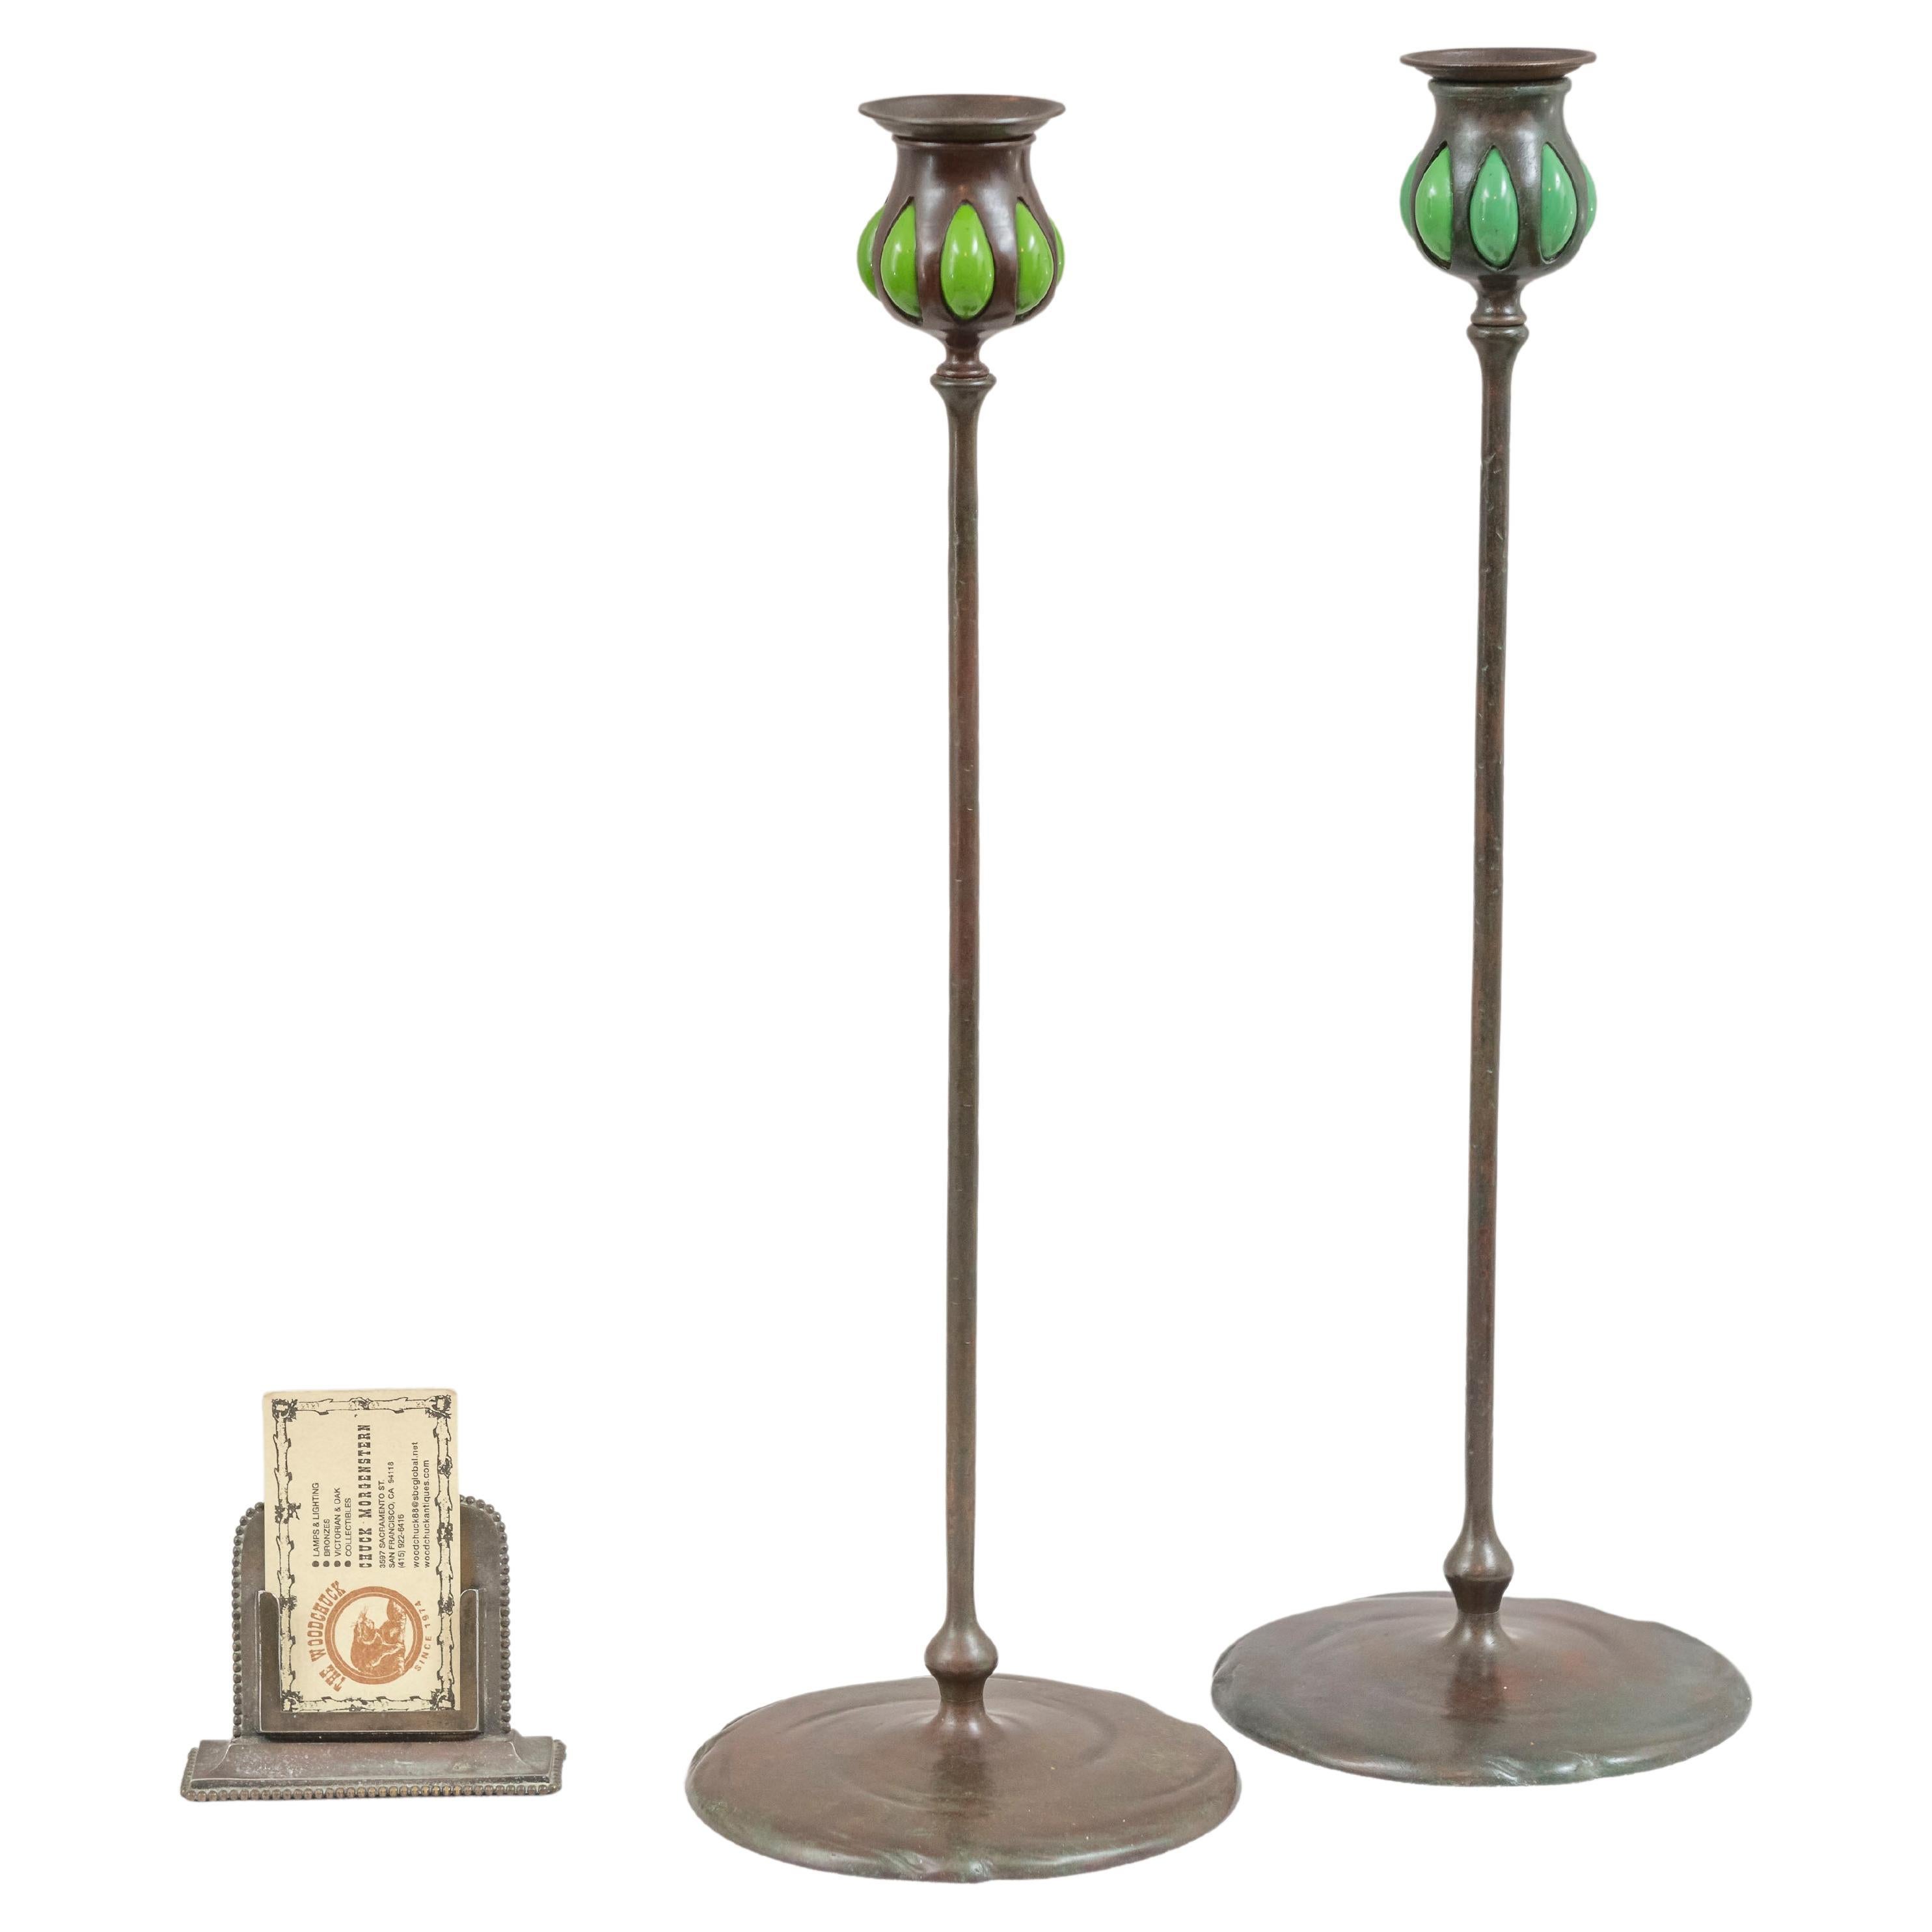 Pair of Signed Bronze & Glass Tiffany Candlesticks, ca. 1905